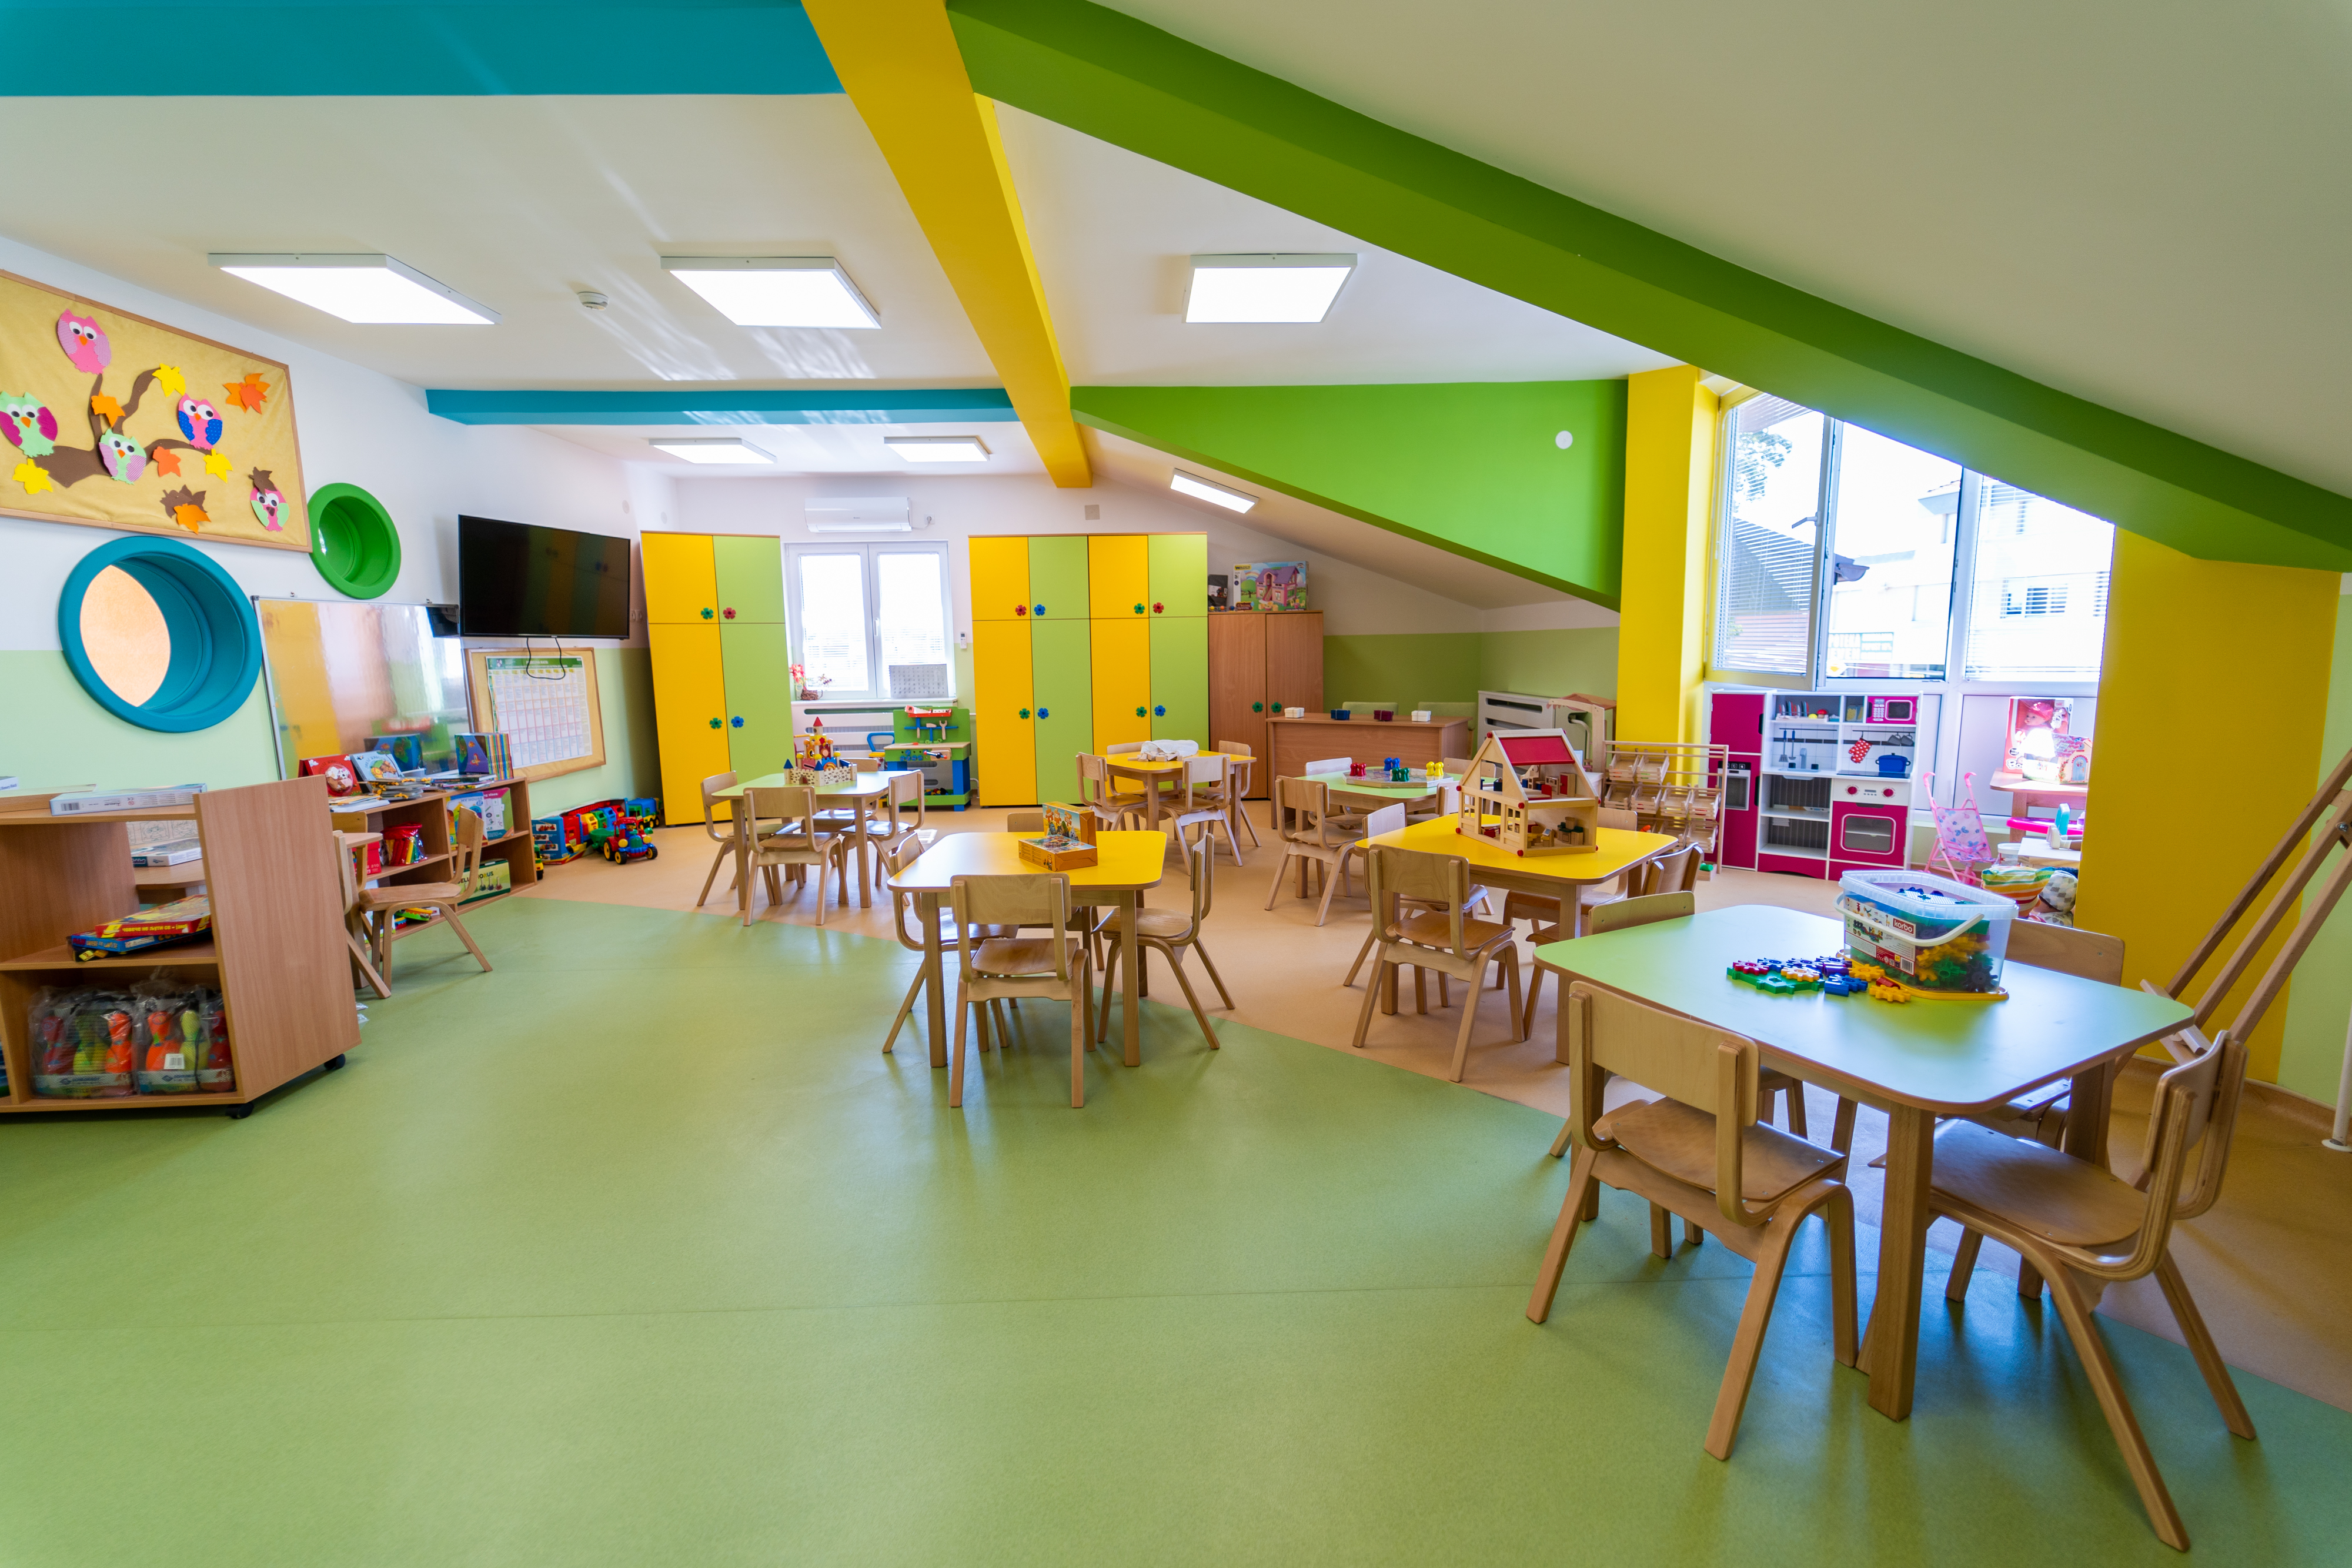 Our Foundation reconstructed and furnished an additional 420 m2 of working space belonging to the "Children’s Joy" pre-school institution in Svilajnac. 